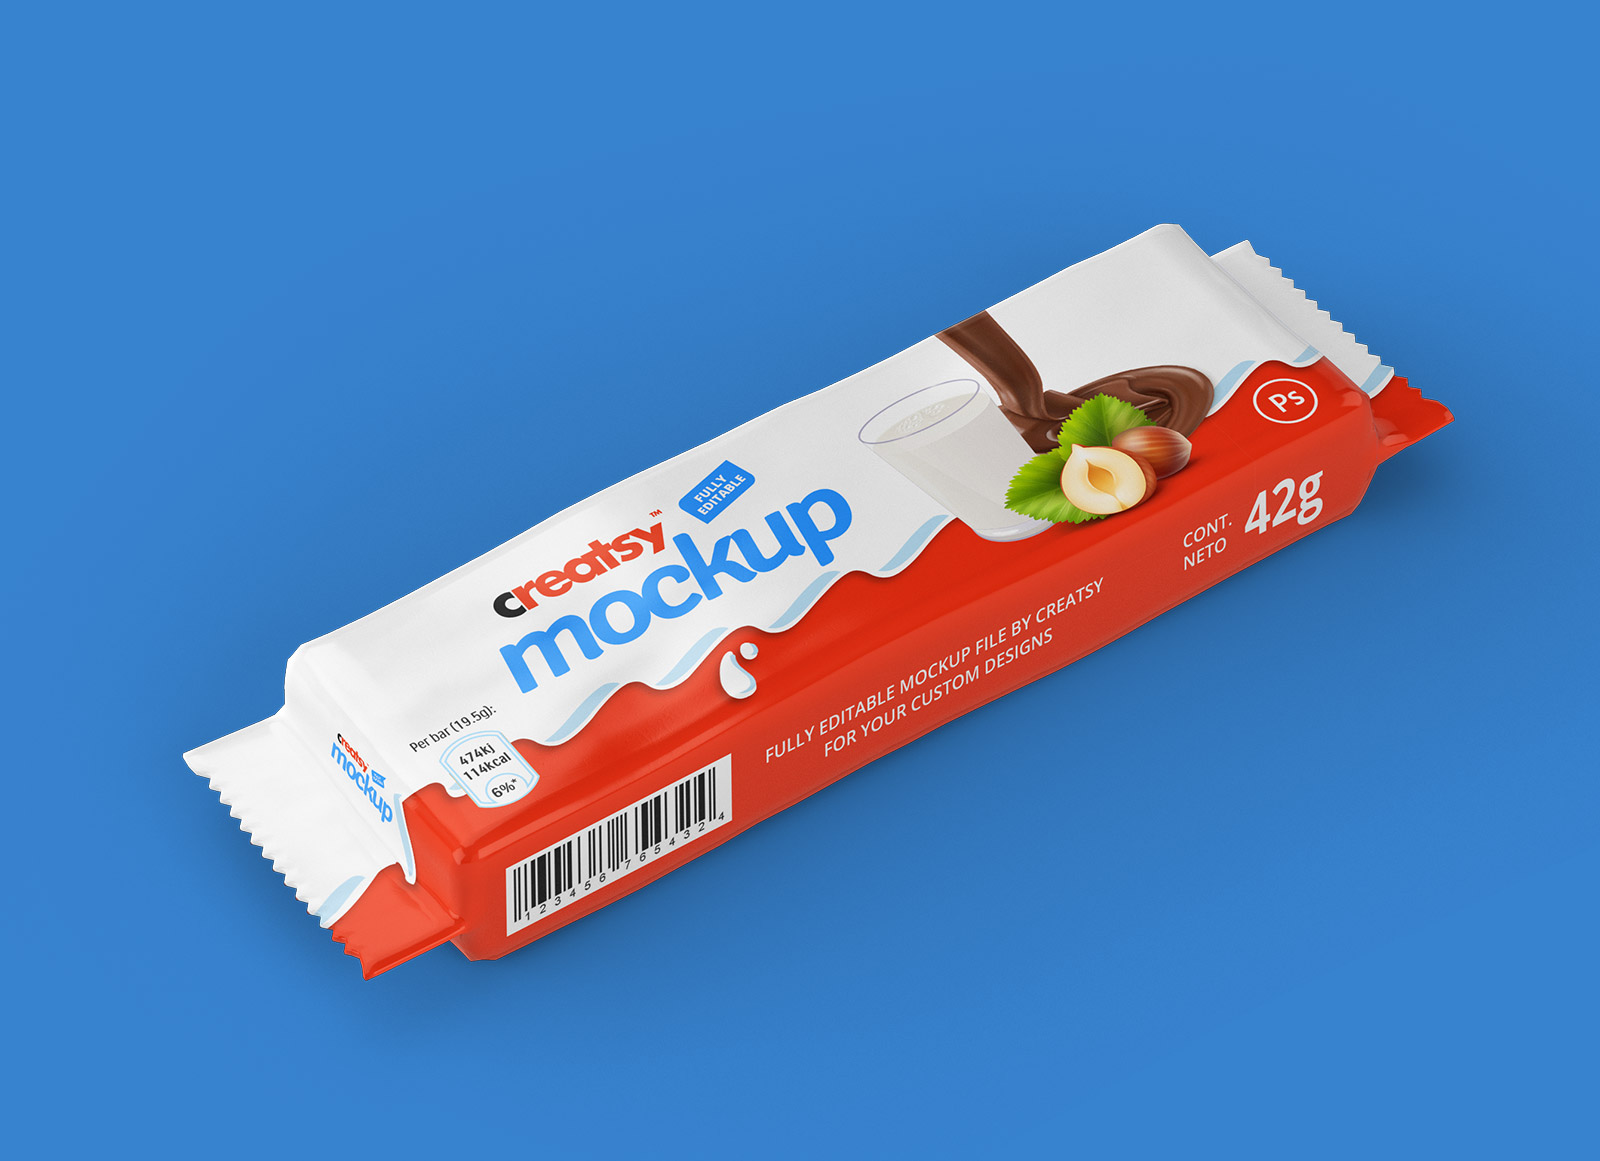 Free-Chocolate-Bar-Wrapper-Packaging-Mockup-PSD-2